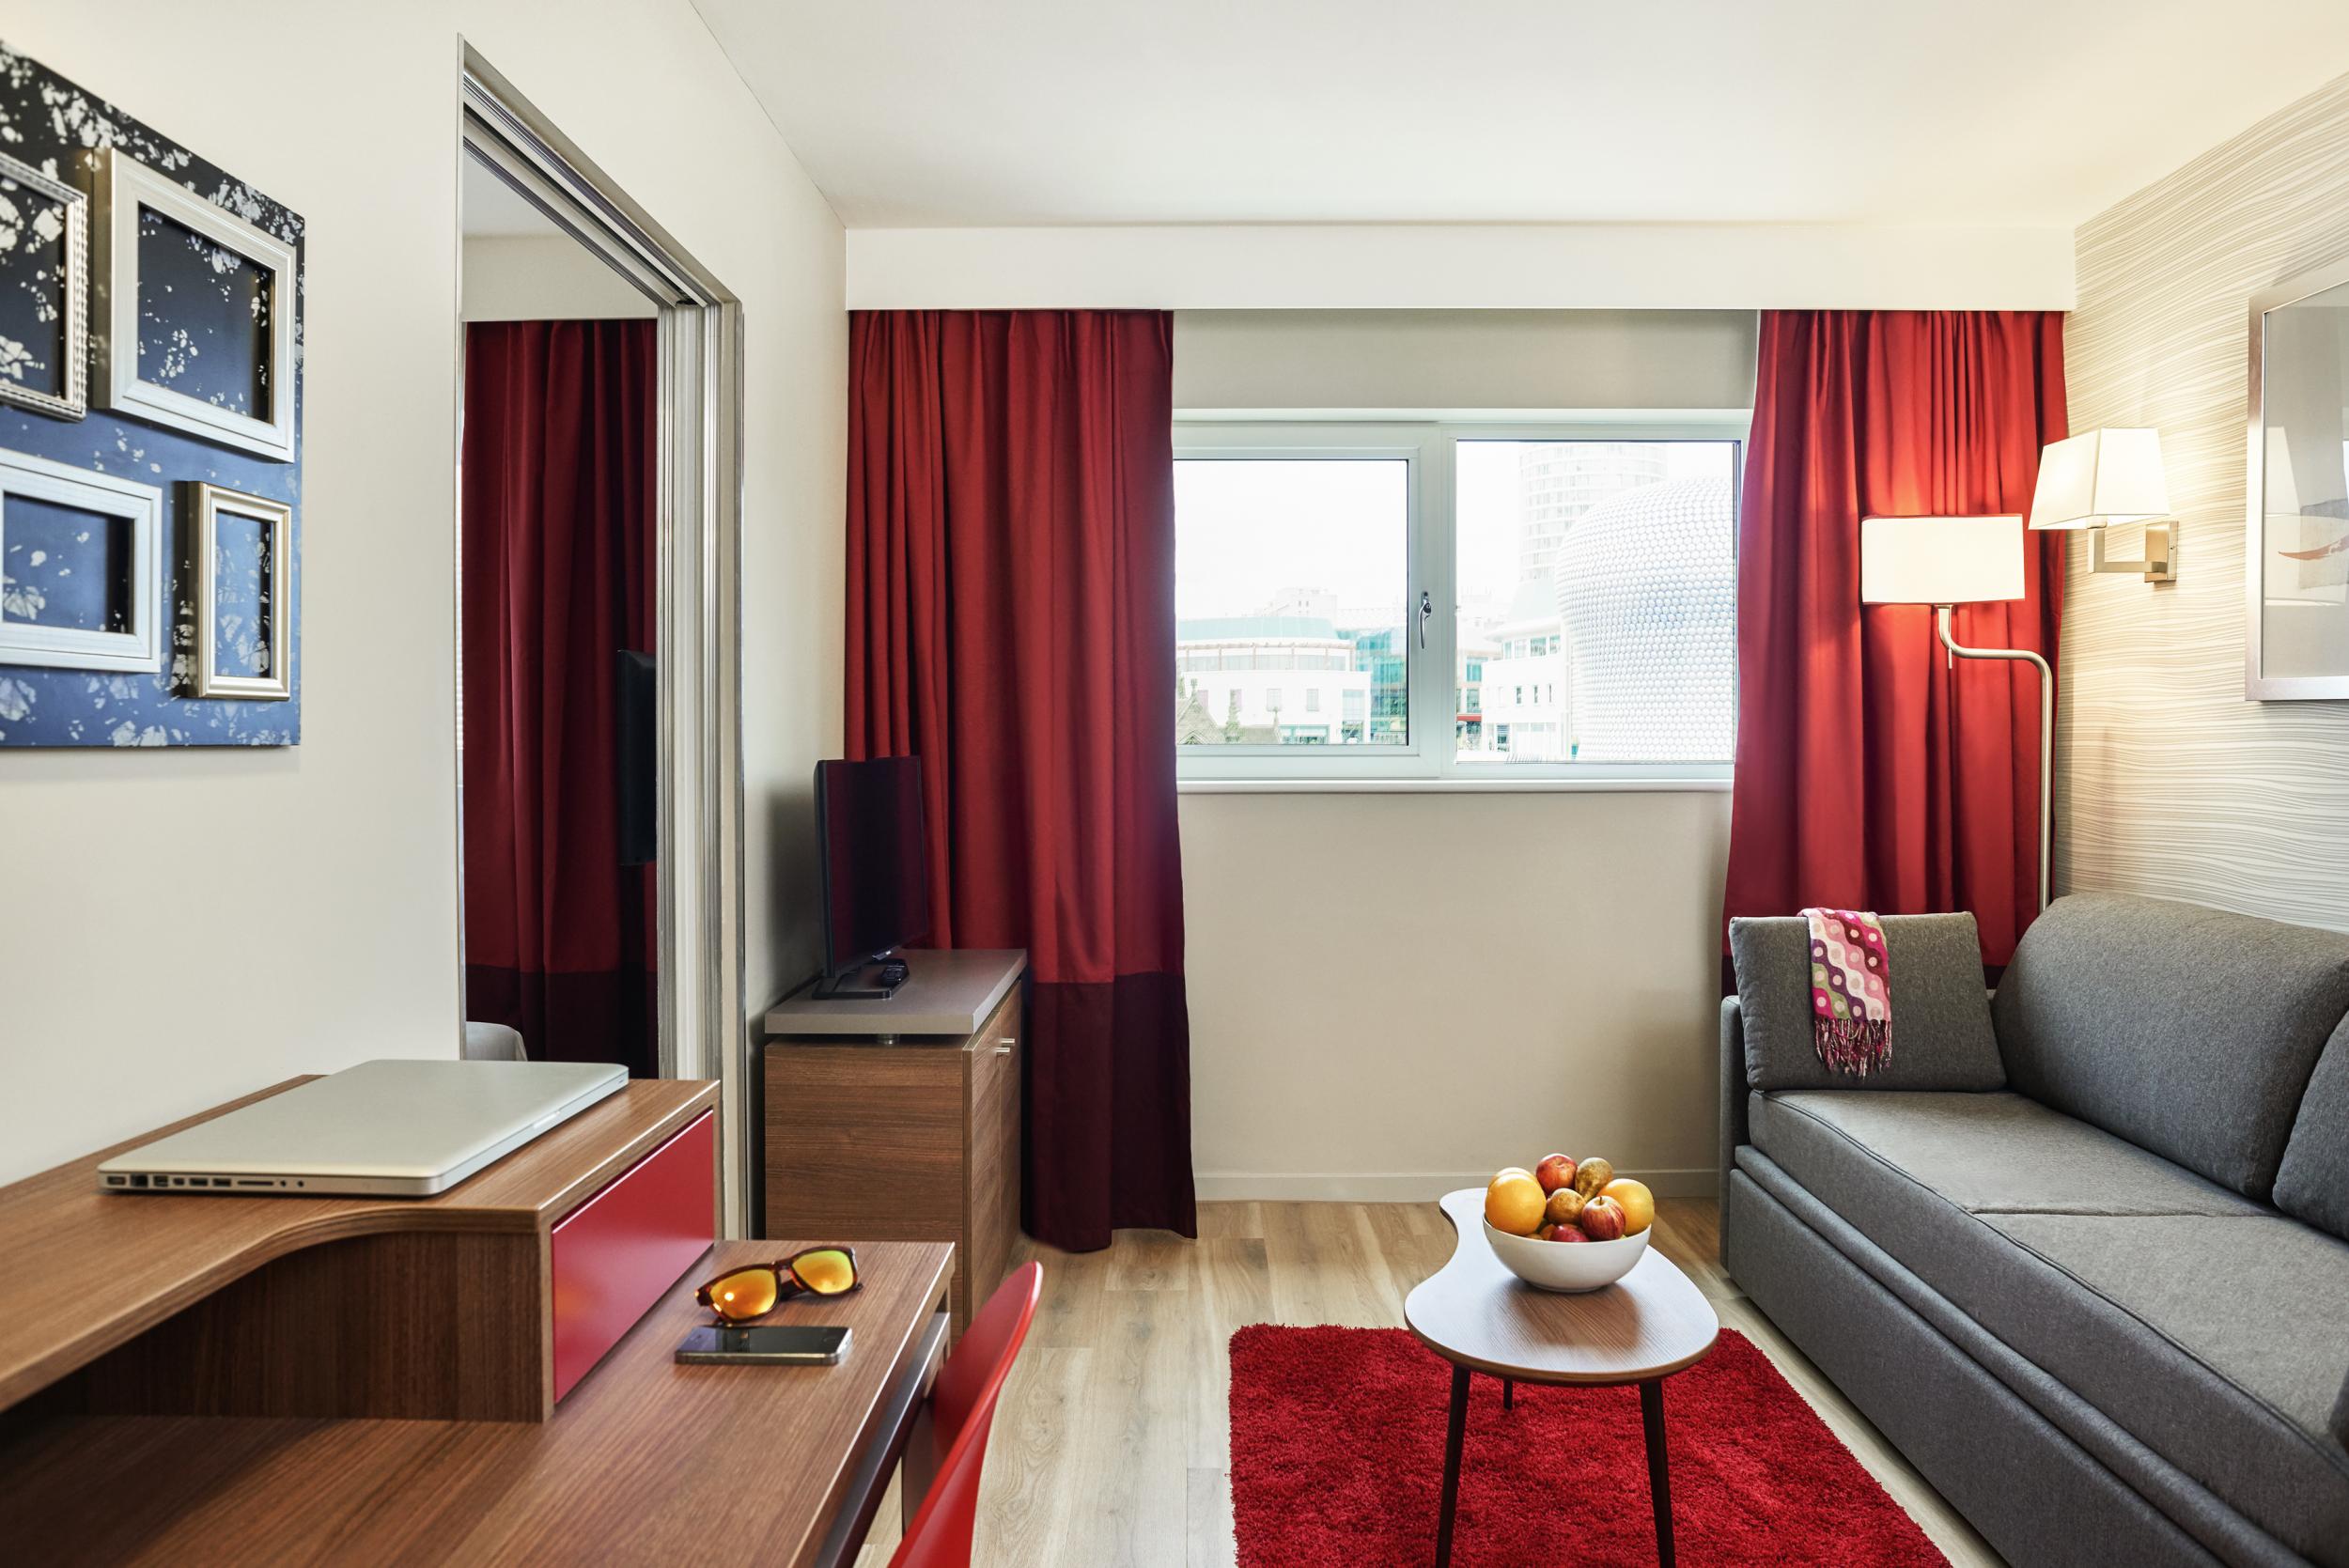 Located close to the Custard Factory arts complex, the Adagio Aparthotel is an ideal choice for those looking to rest their head after a night on the tiles